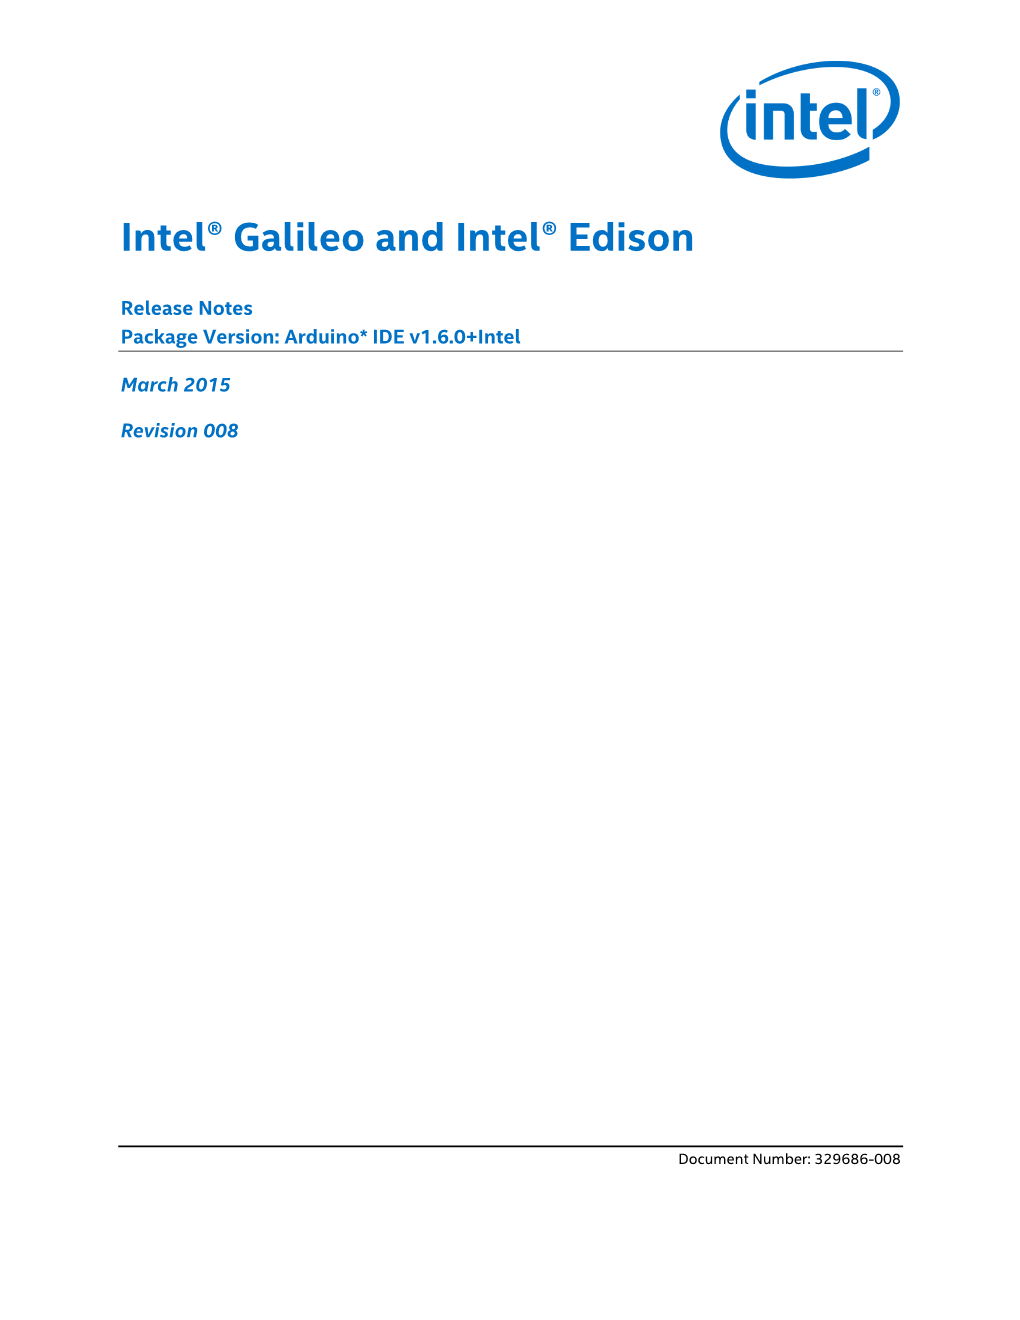 Intel® Galileo and Intel® Edison Release Notes March 2015 2 Document Number: 329686-008 Introduction